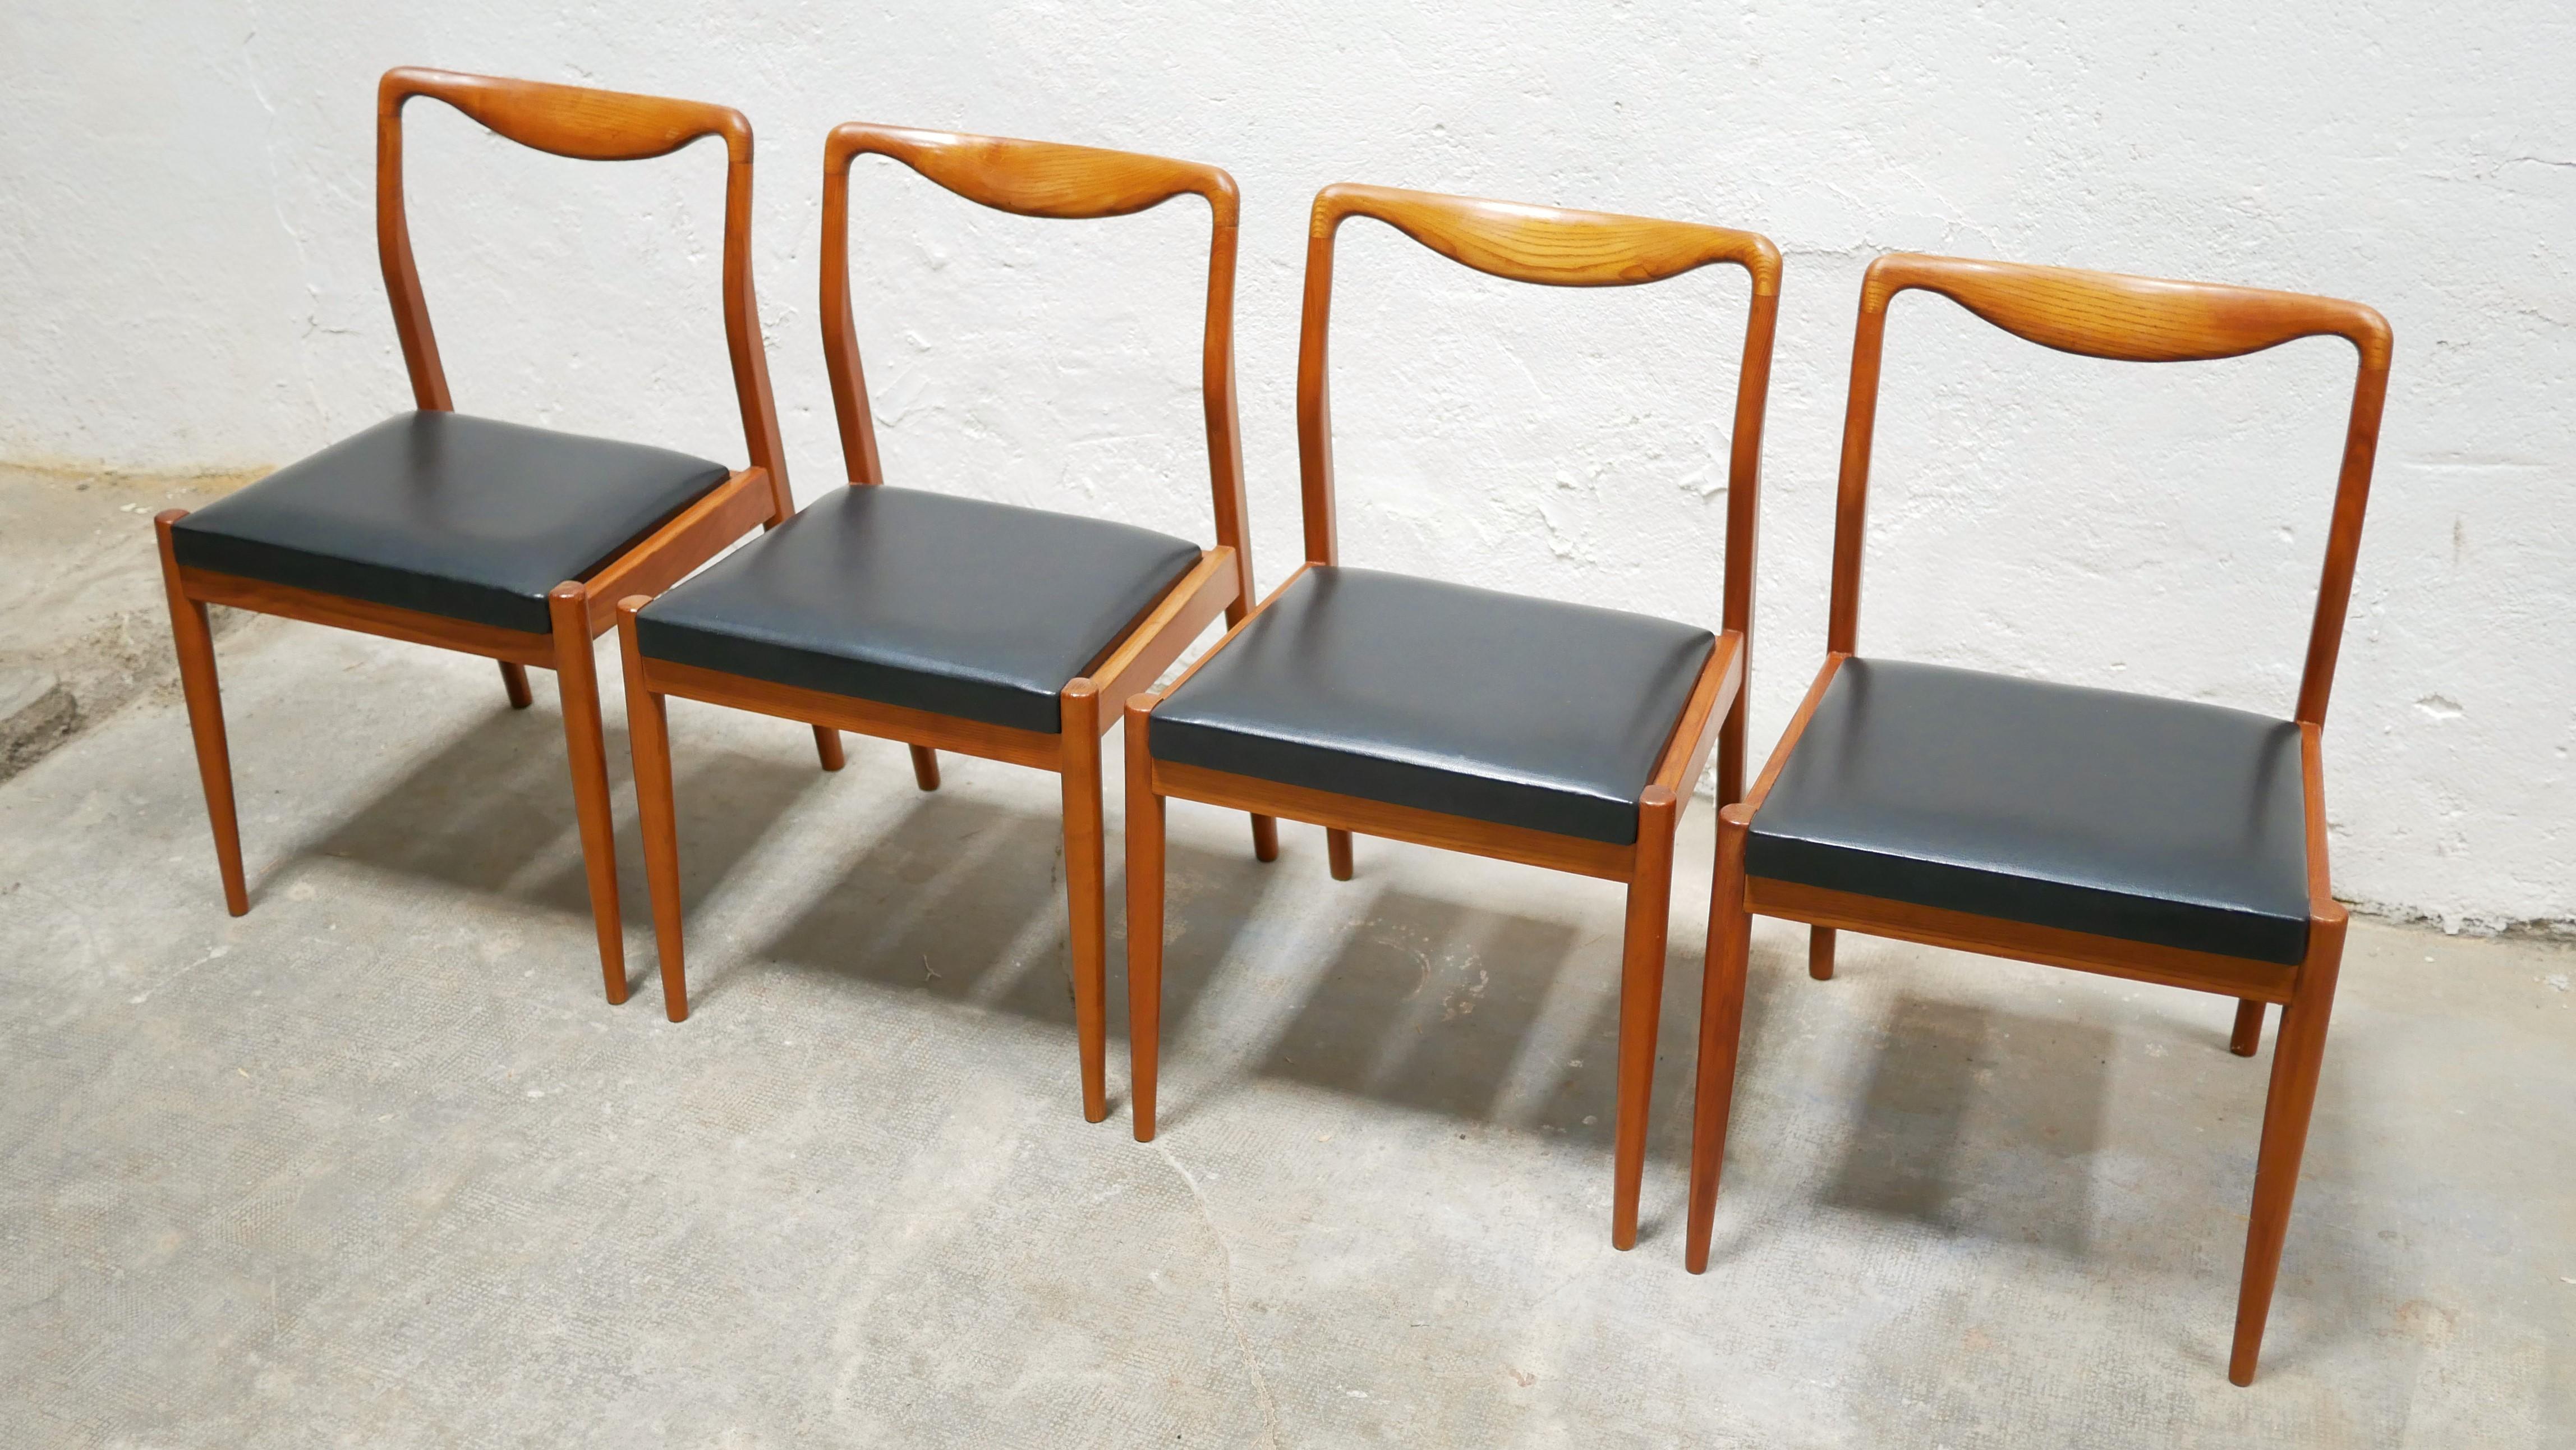 Series of 4 Scandinavian chairs dating from the 60s.

Their lines and their minimalist and sober design bring them a lot of elegance and character.
Structure in teak, bright and intense color, seat in black imitation leather.

Beautifully